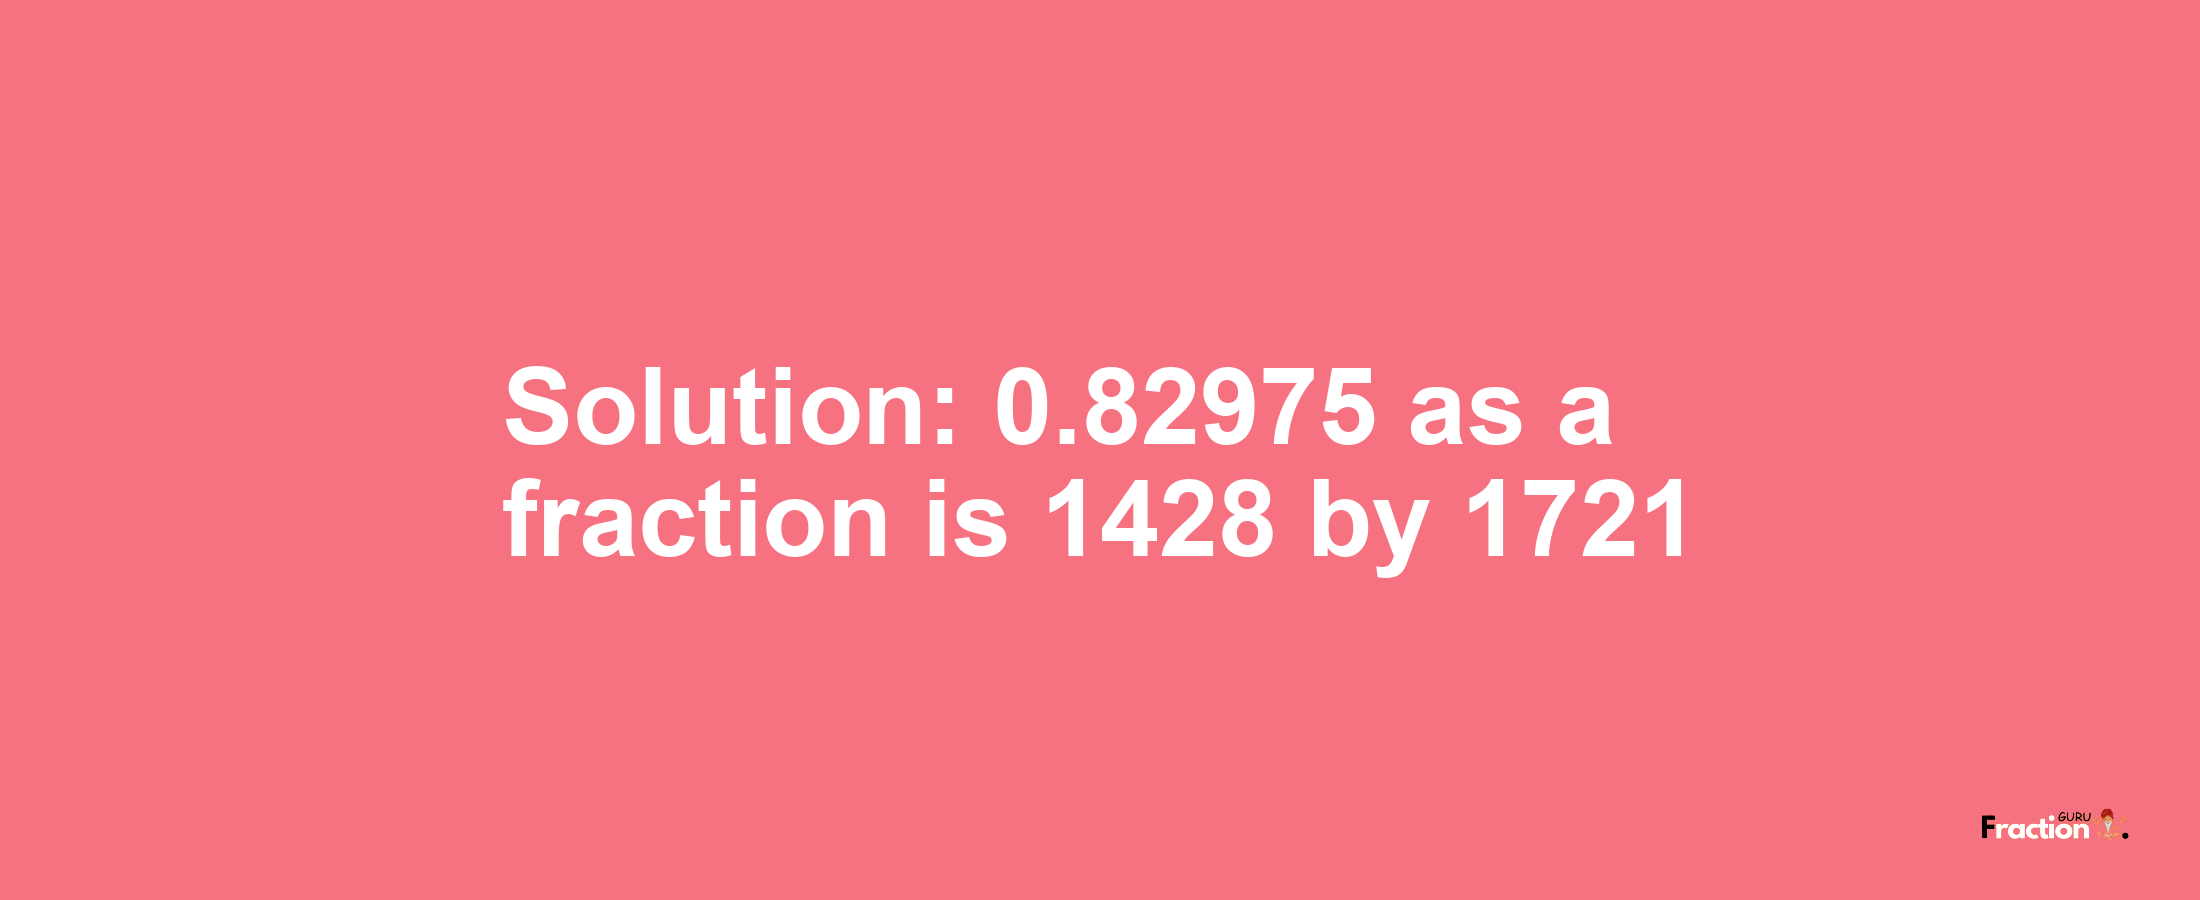 Solution:0.82975 as a fraction is 1428/1721